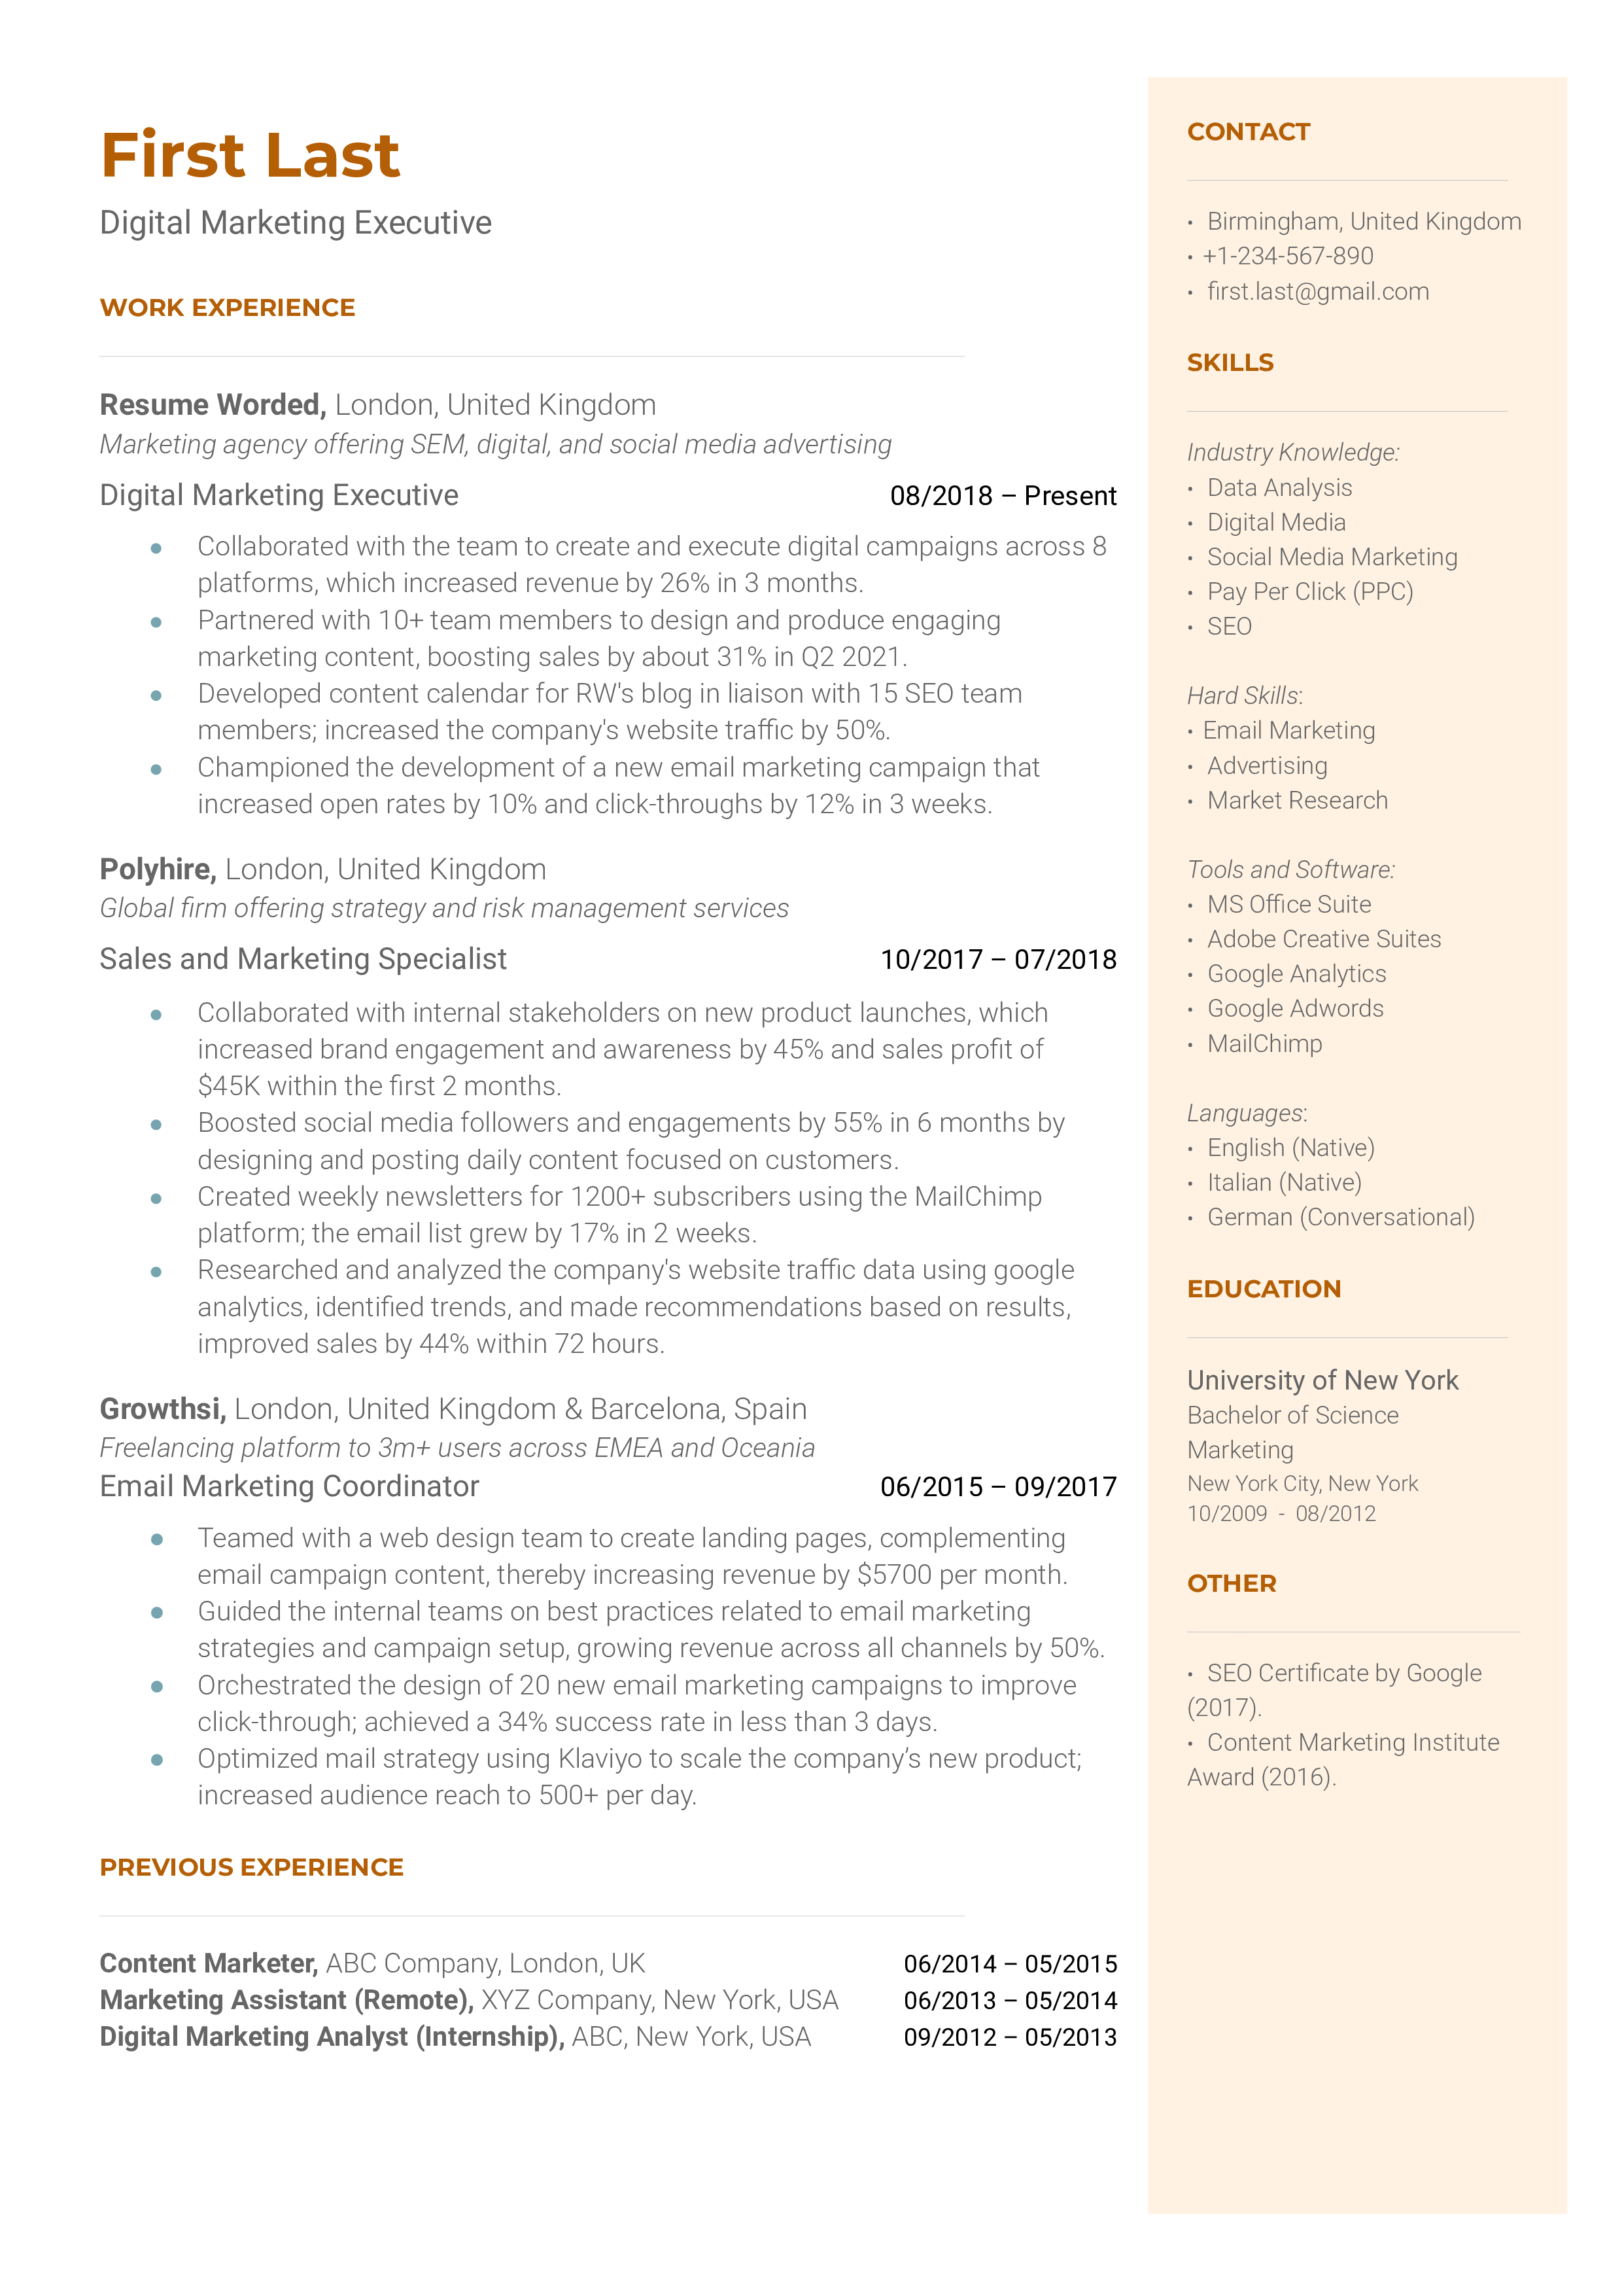 A digital marketing executive resume template that emphasizes technical skills. 